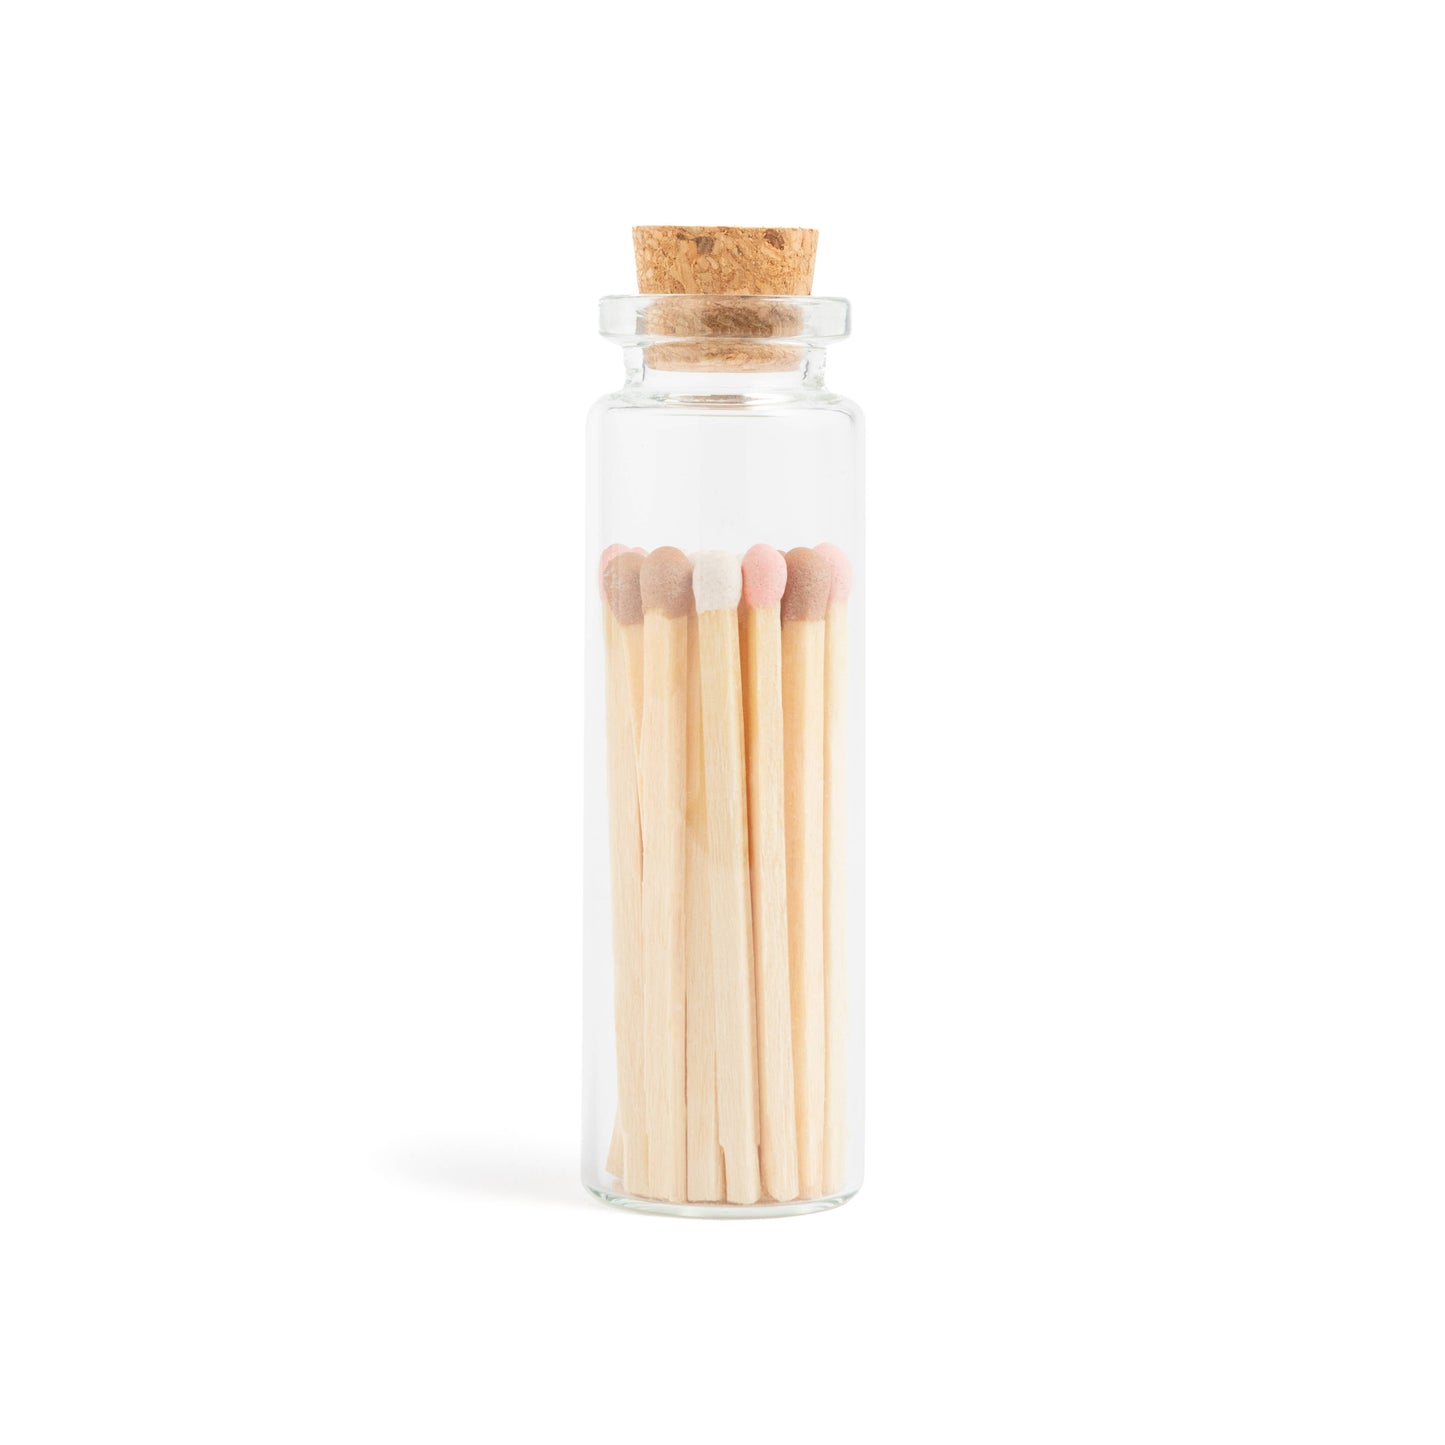 Neapolitan Matches in Small Corked Vial